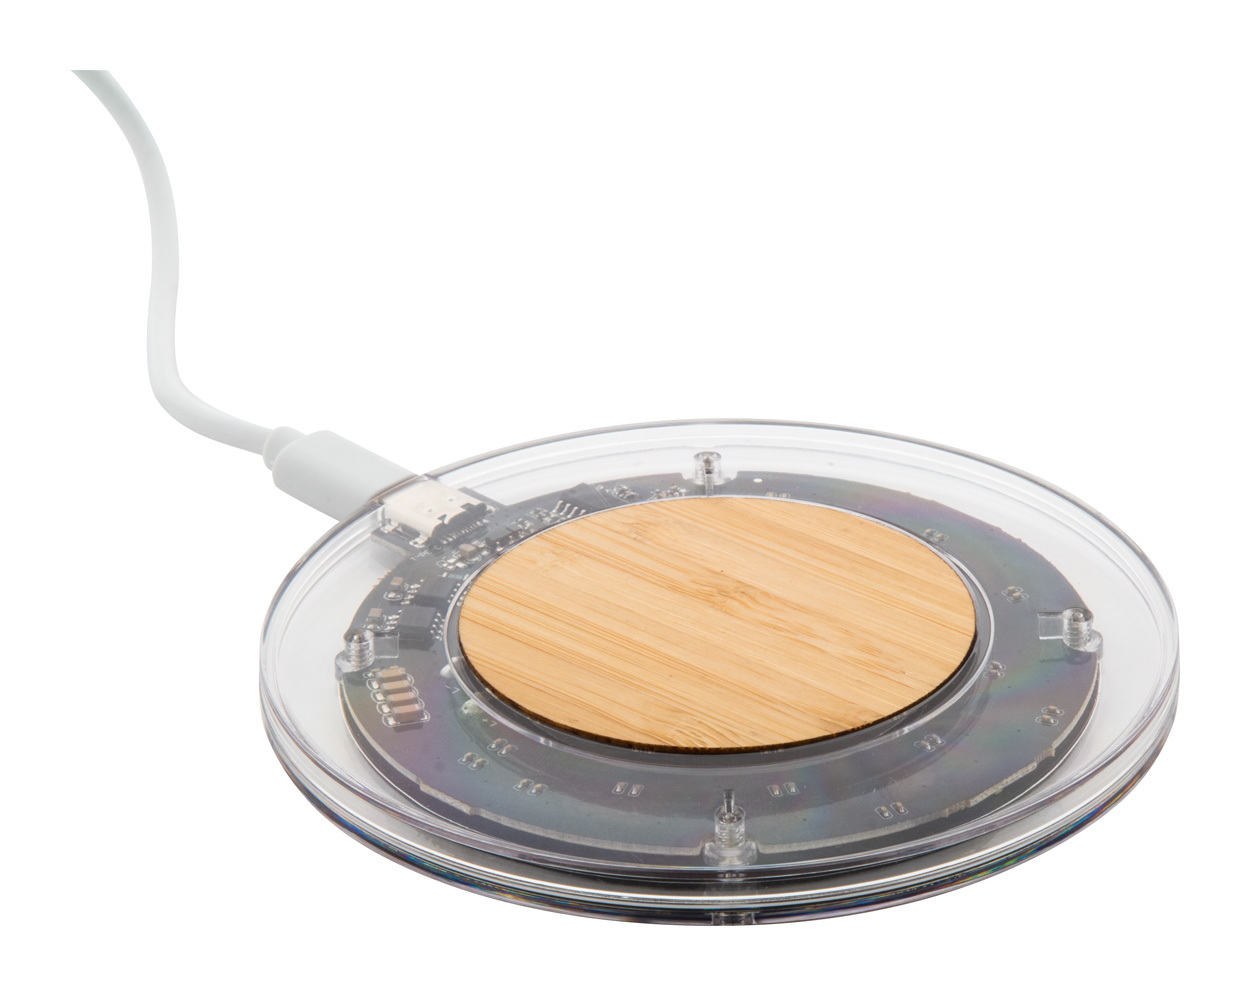 transparenter Wireless-Charger SeeCharge